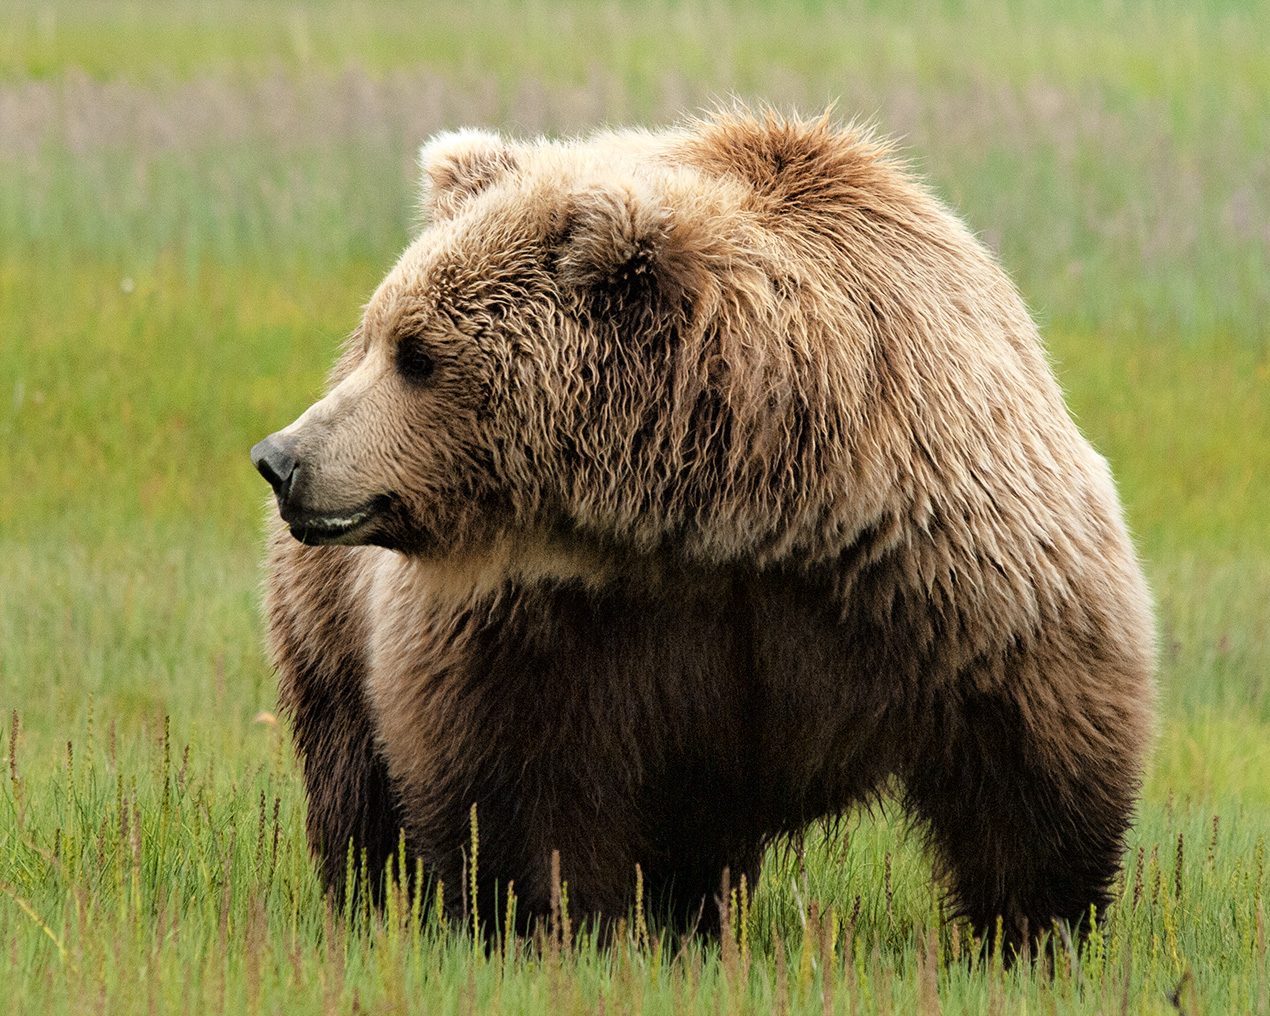 Grizzly vs Black Bear | Know the Difference - BearSmart.com